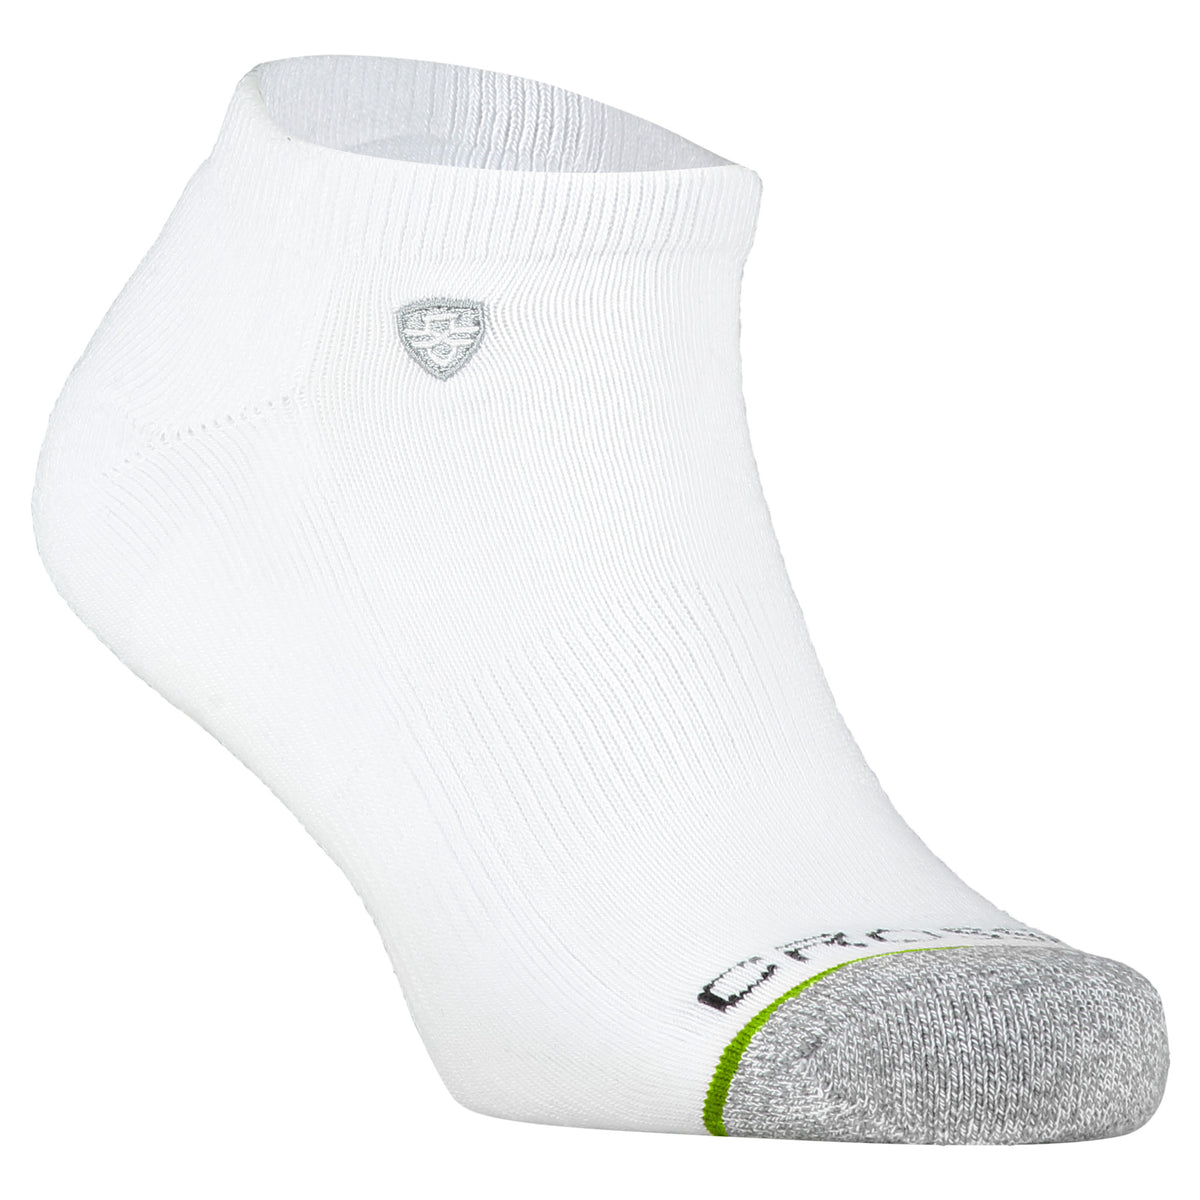 Crossfly men&#39;s Original Low Socks in white from the Everyday series, featuring Flat Toe Seams and 360 Hold.